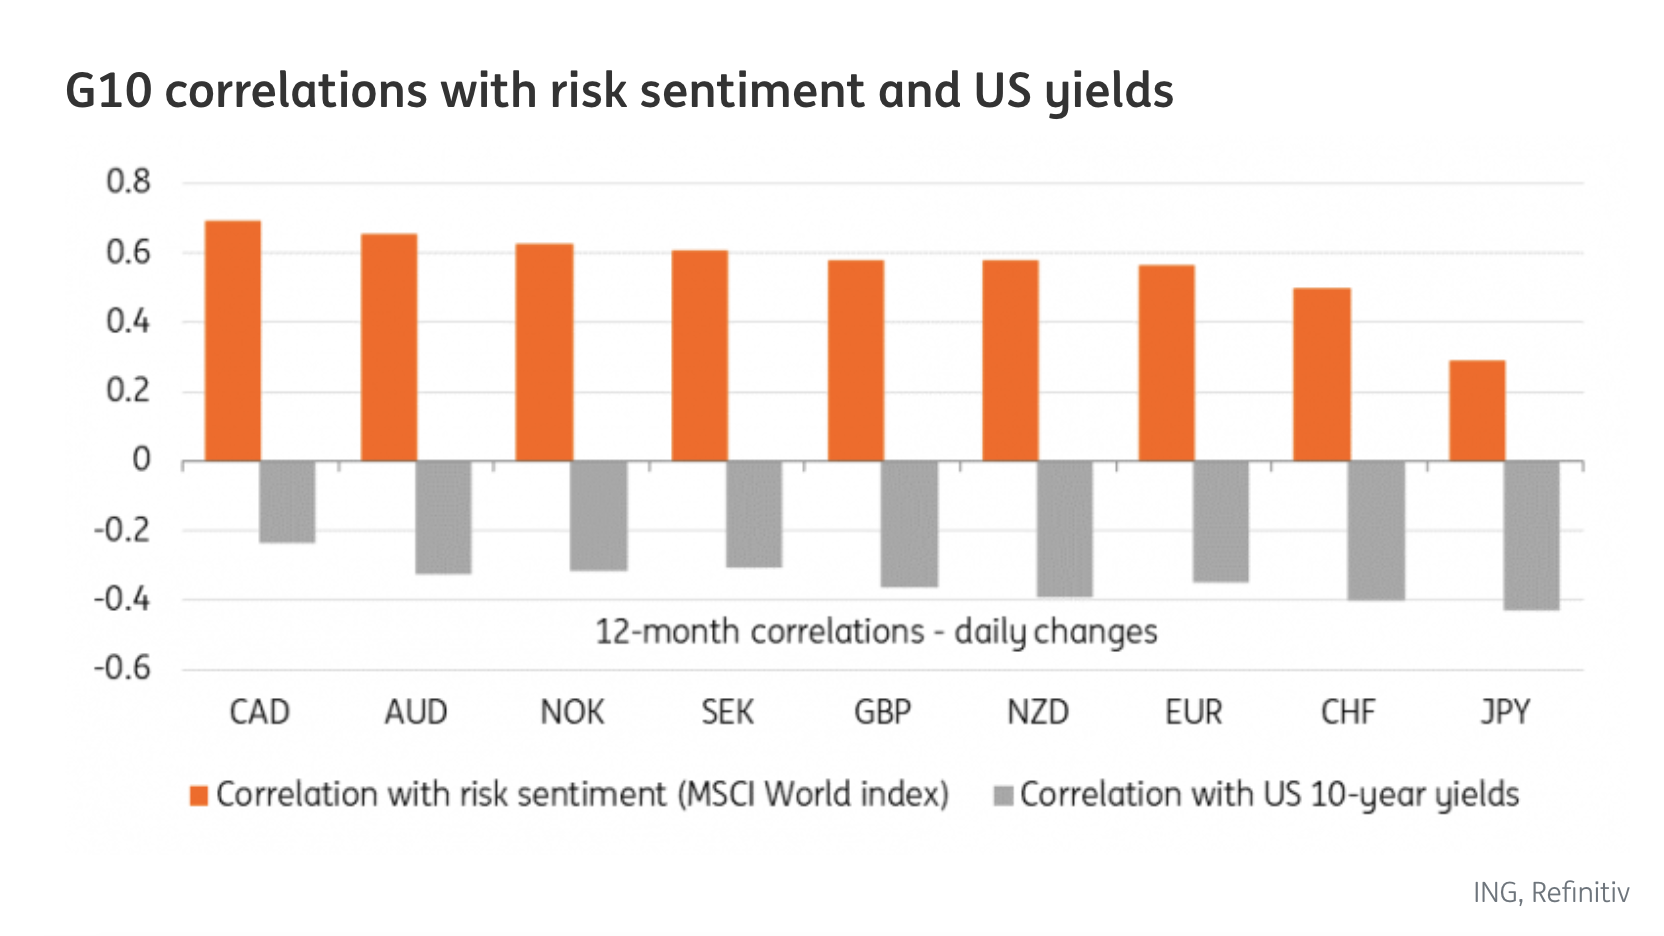 G10 correlations with risk sentiment and US yields